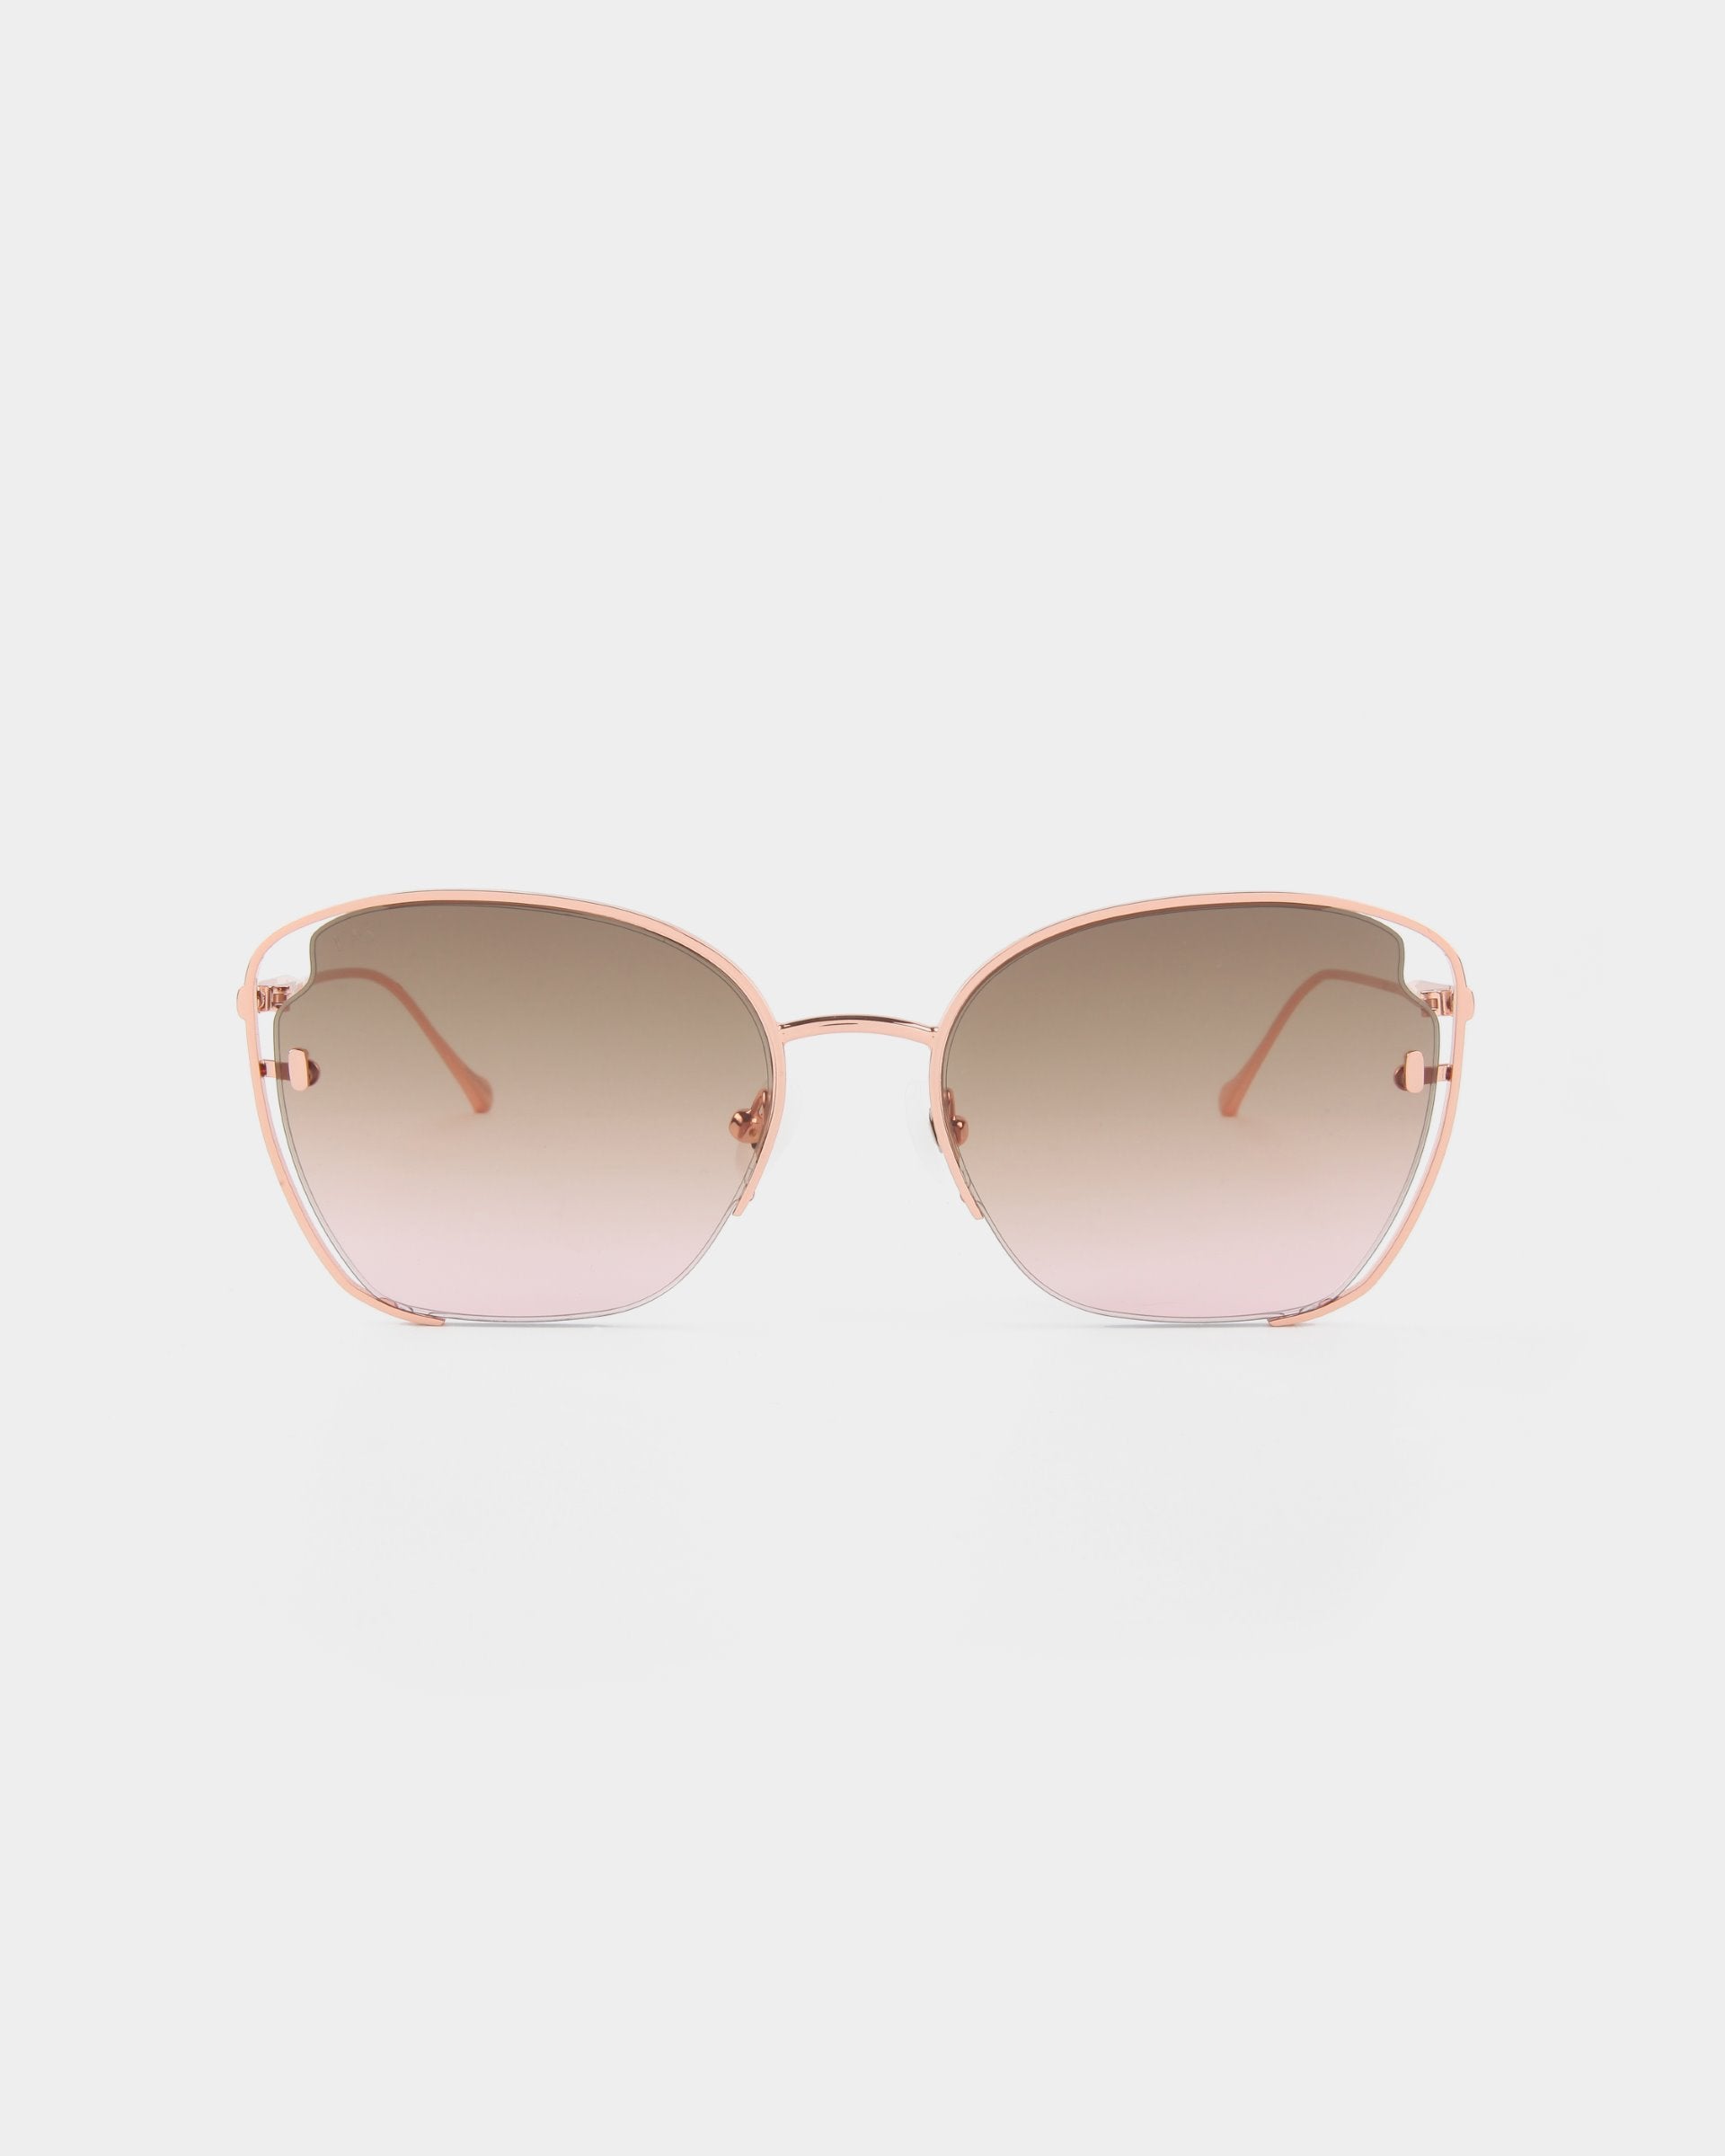 A pair of For Art&#39;s Sake® Eden sunglasses with a thin, 18-karat gold plated rose gold frame and gradient brown lenses, offering UVA &amp; UVB protection, set against a white background.